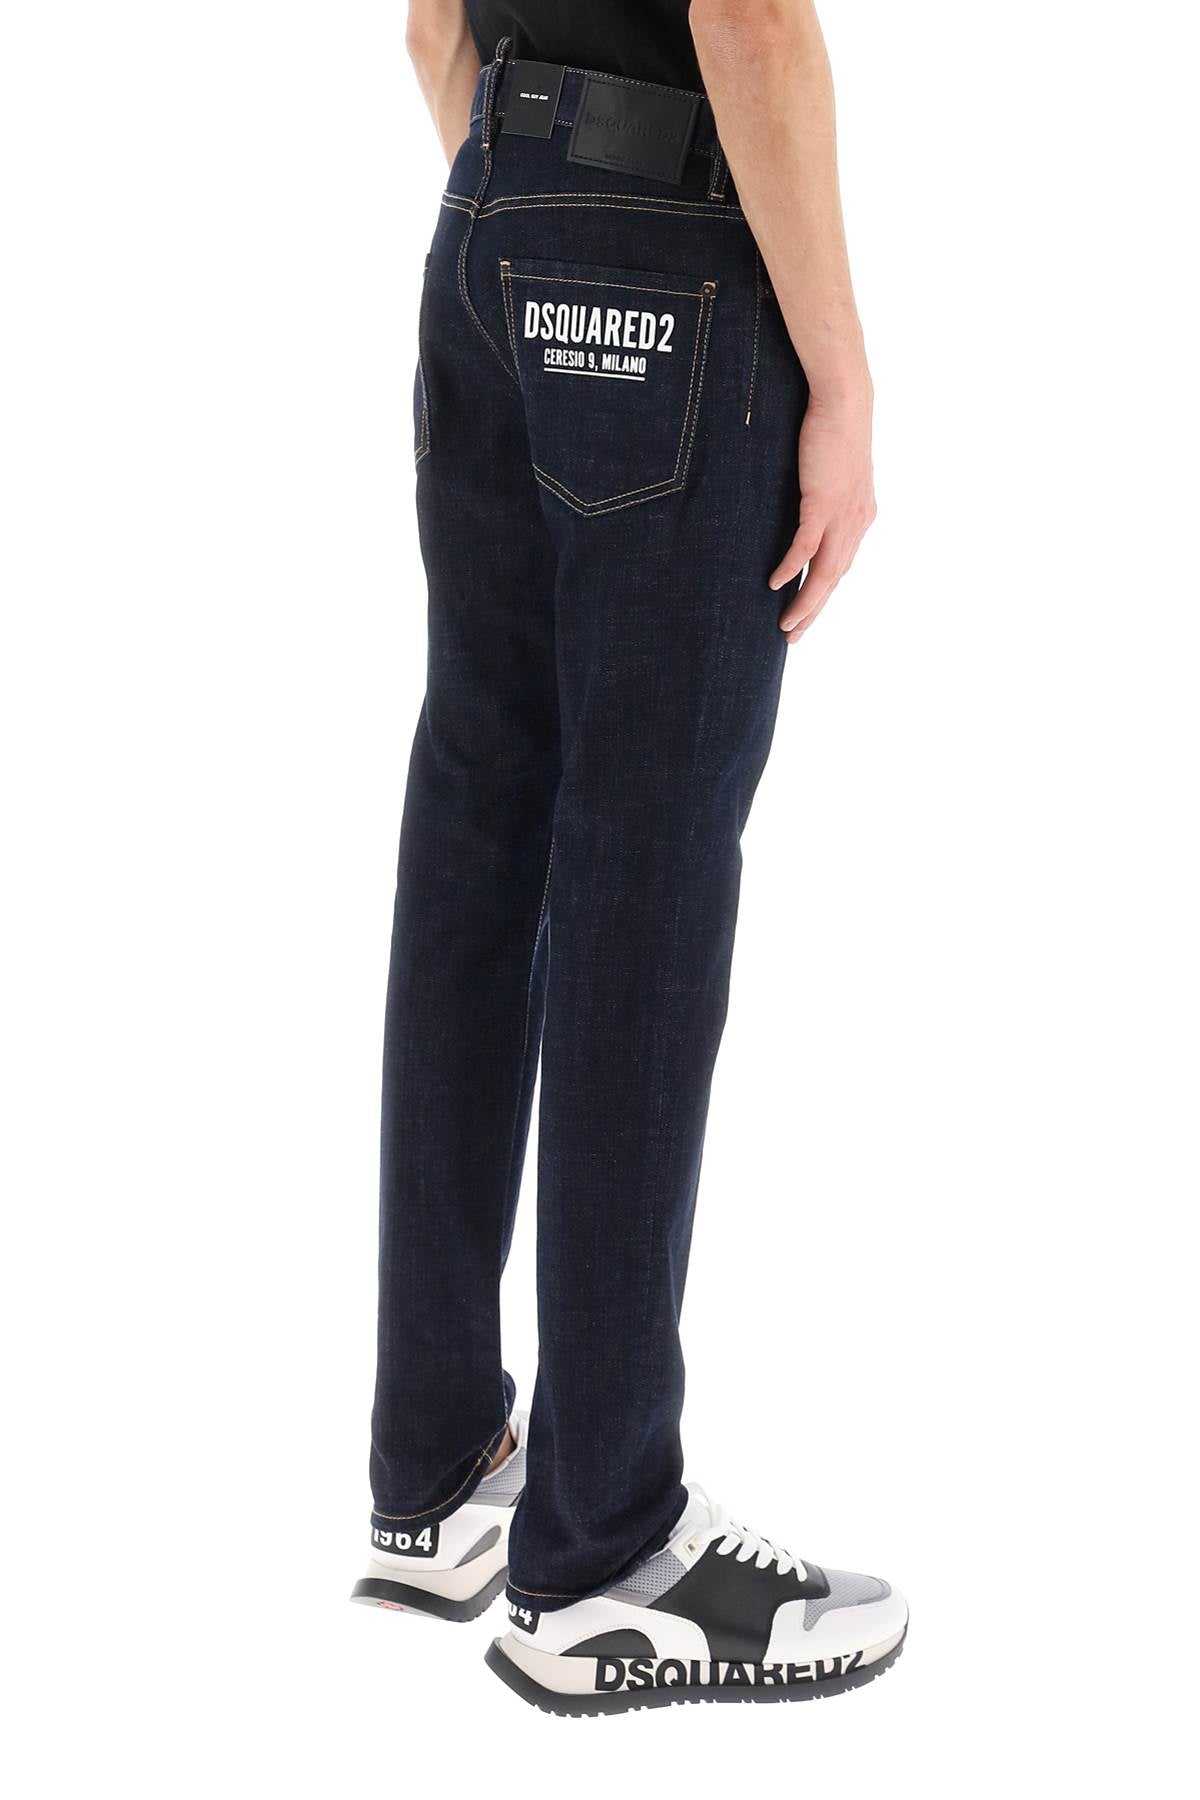 Dsquared2 cool guy jeans in dark rinse wash-3